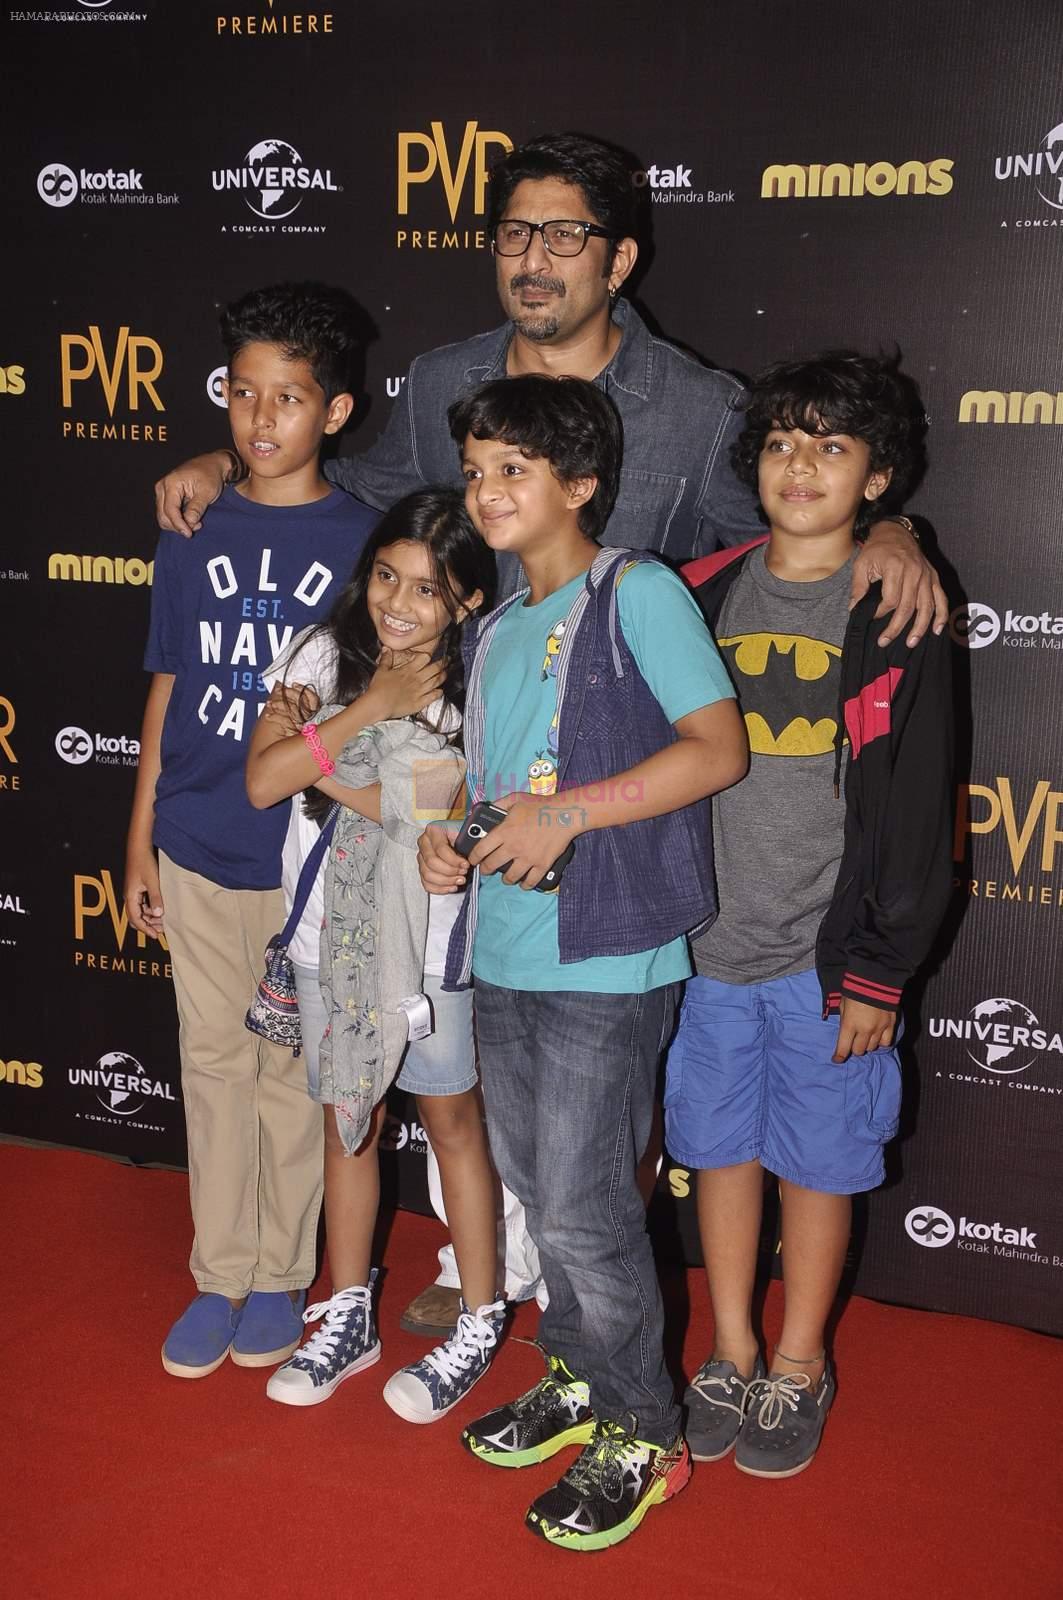 Arshad Warsi at Minions premiere on 8th July 2015